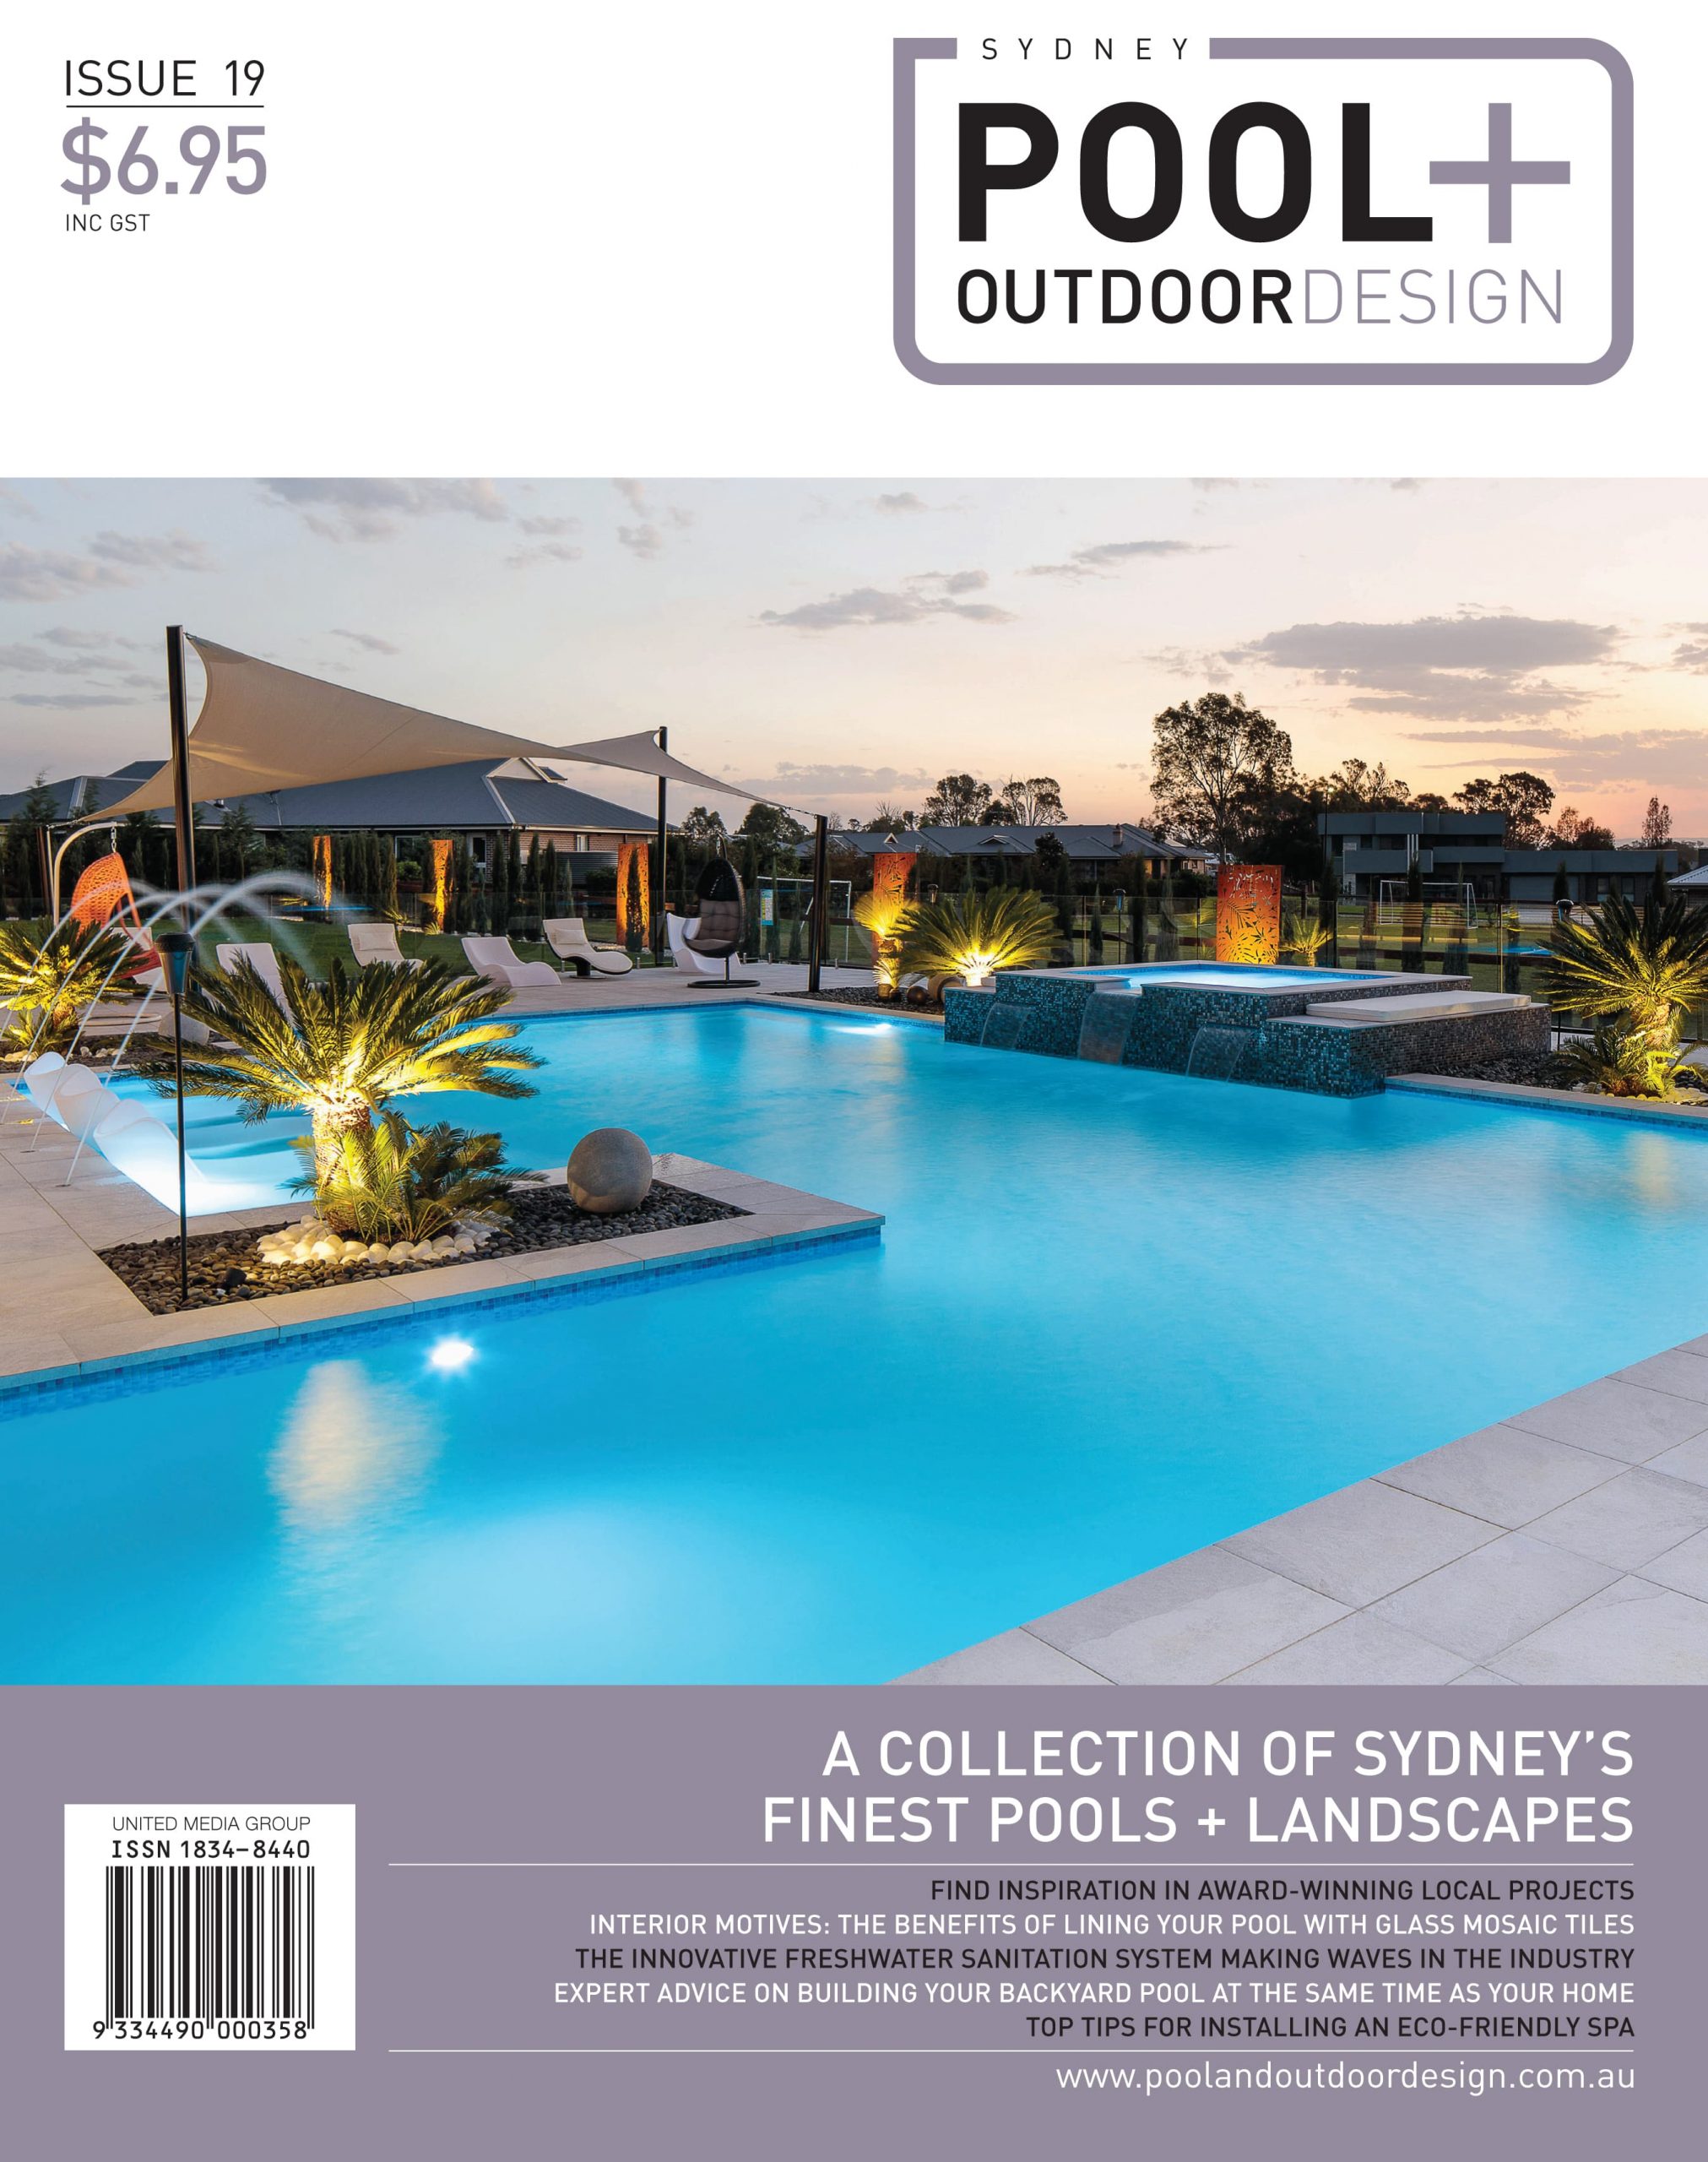 Pool + Outdoor Design Issue 19